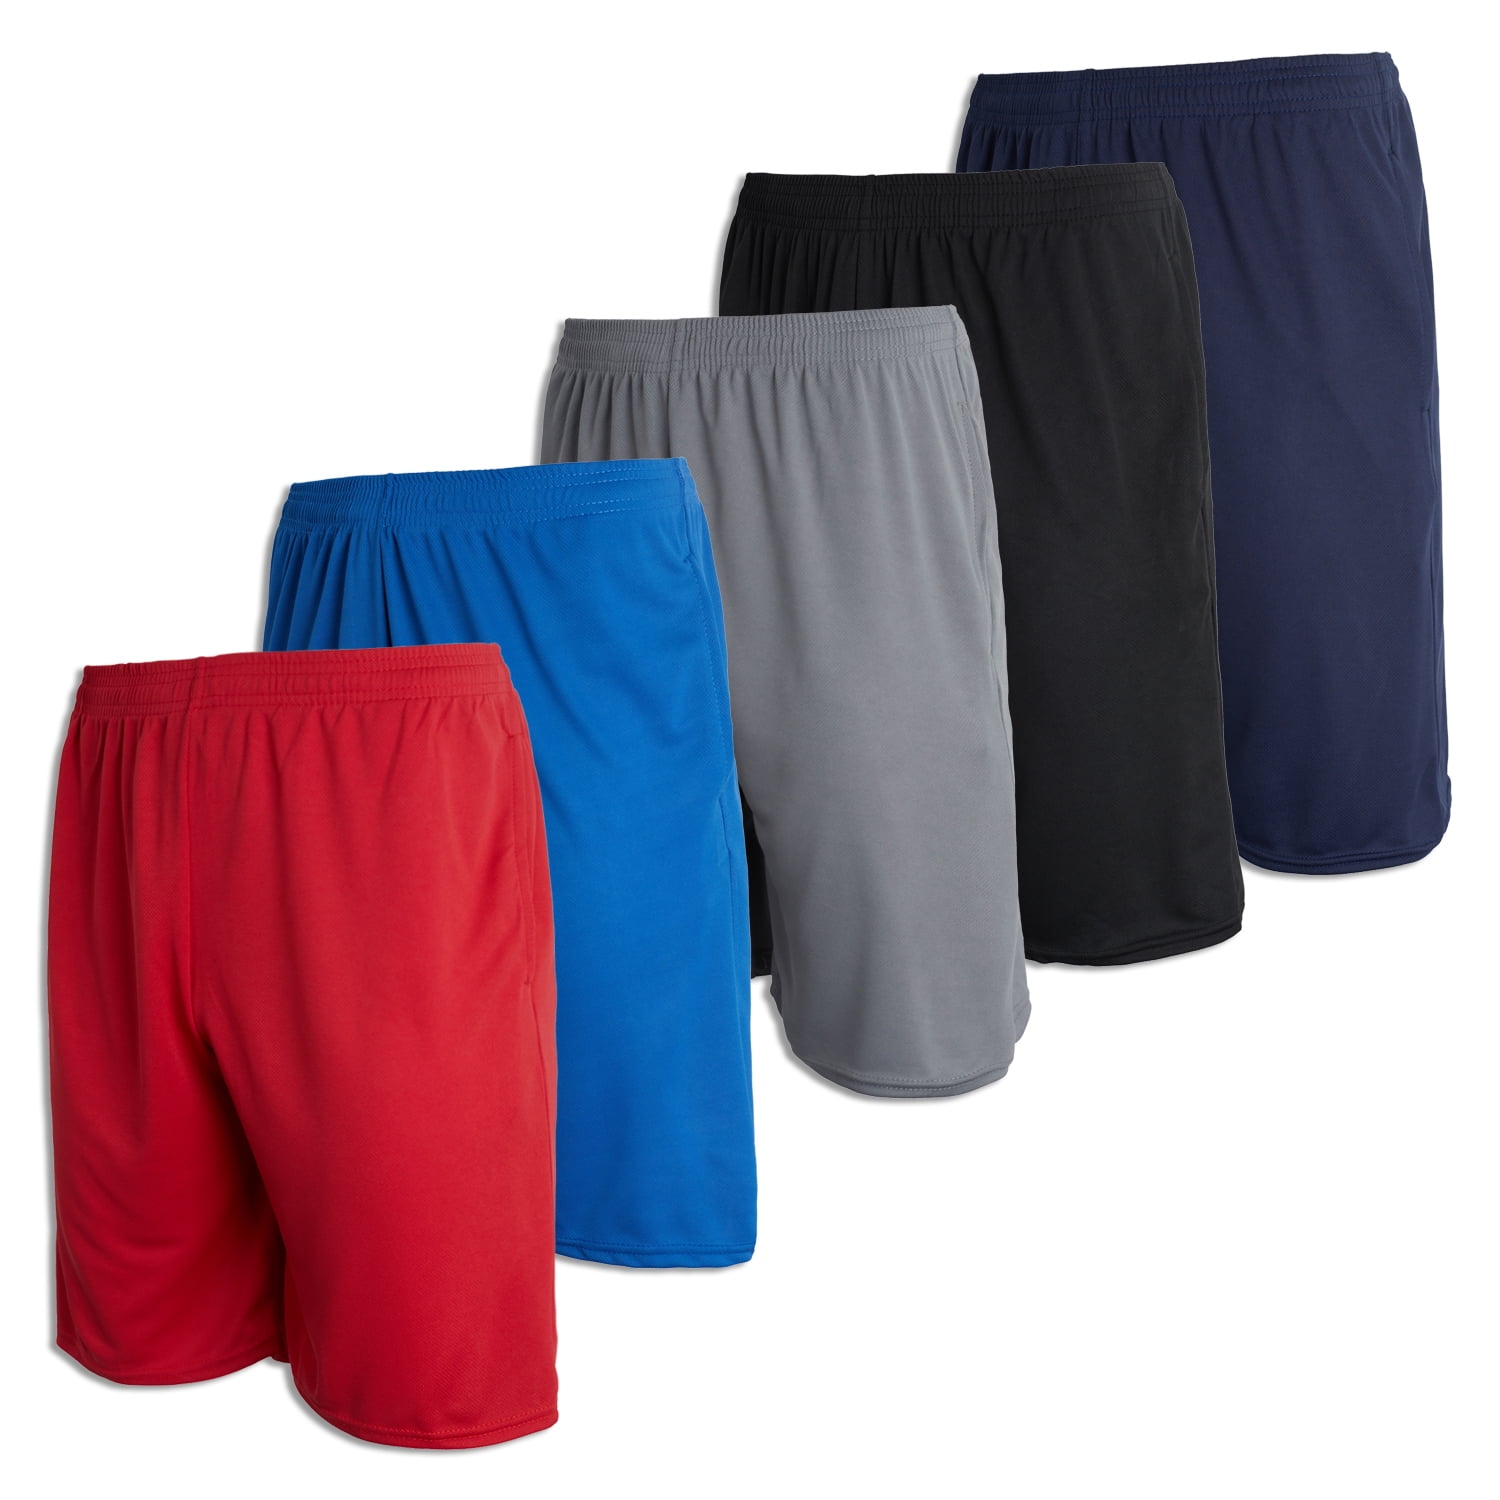 5 Pack: Men's Mesh Athletic Performance Gym Shorts with Pockets (S-3X ...